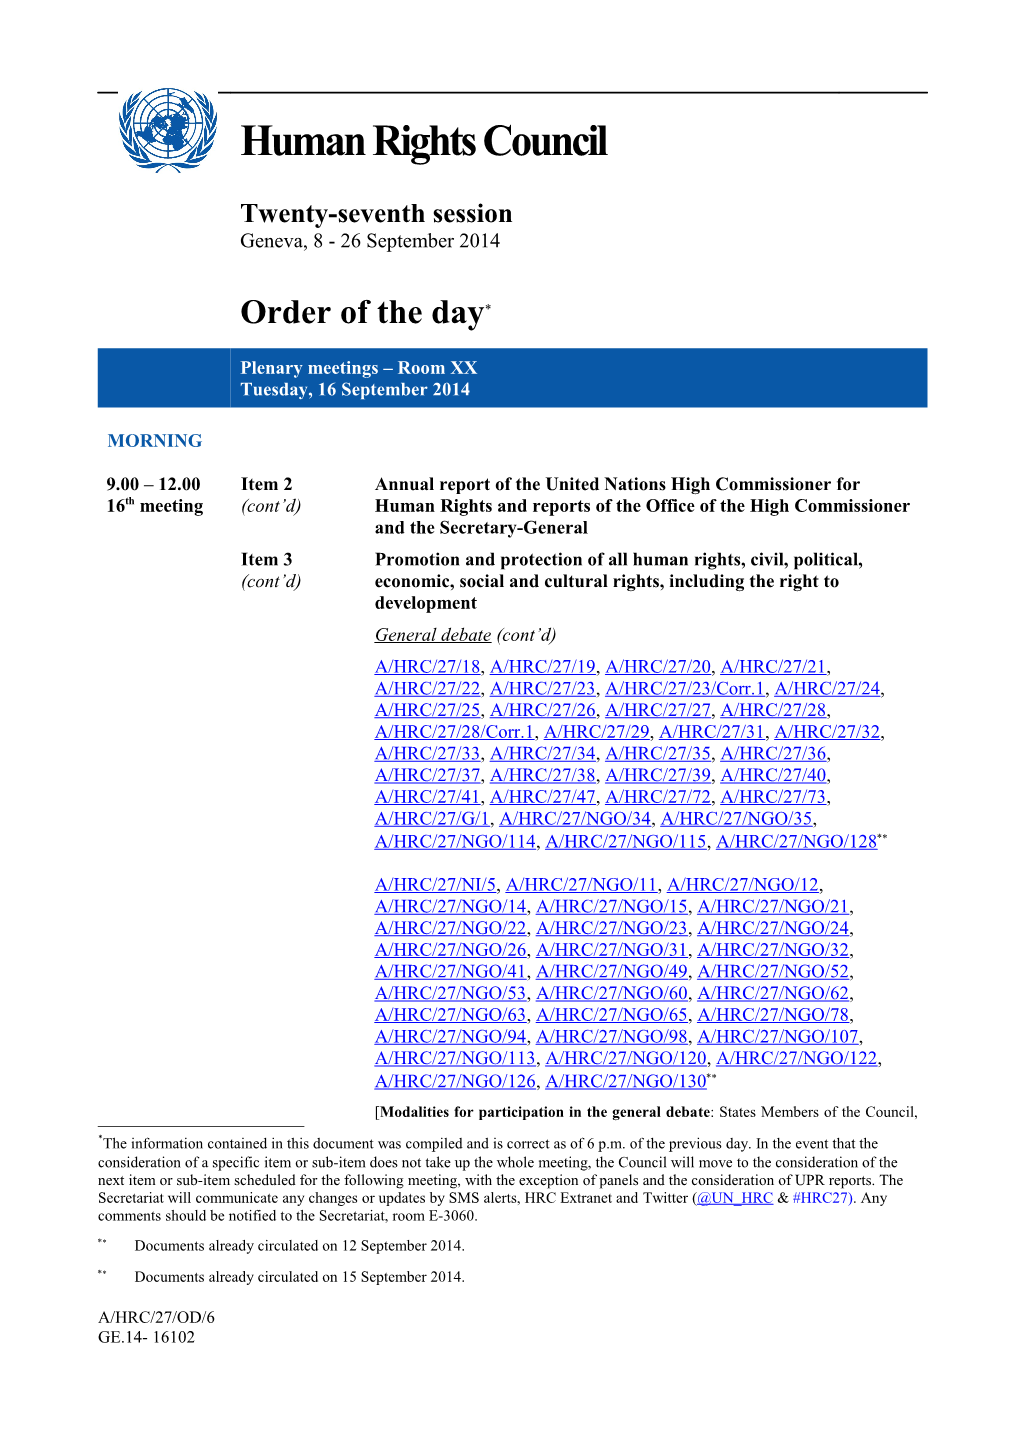 Order of the Day, Tuesday, 16 September 2014 in English